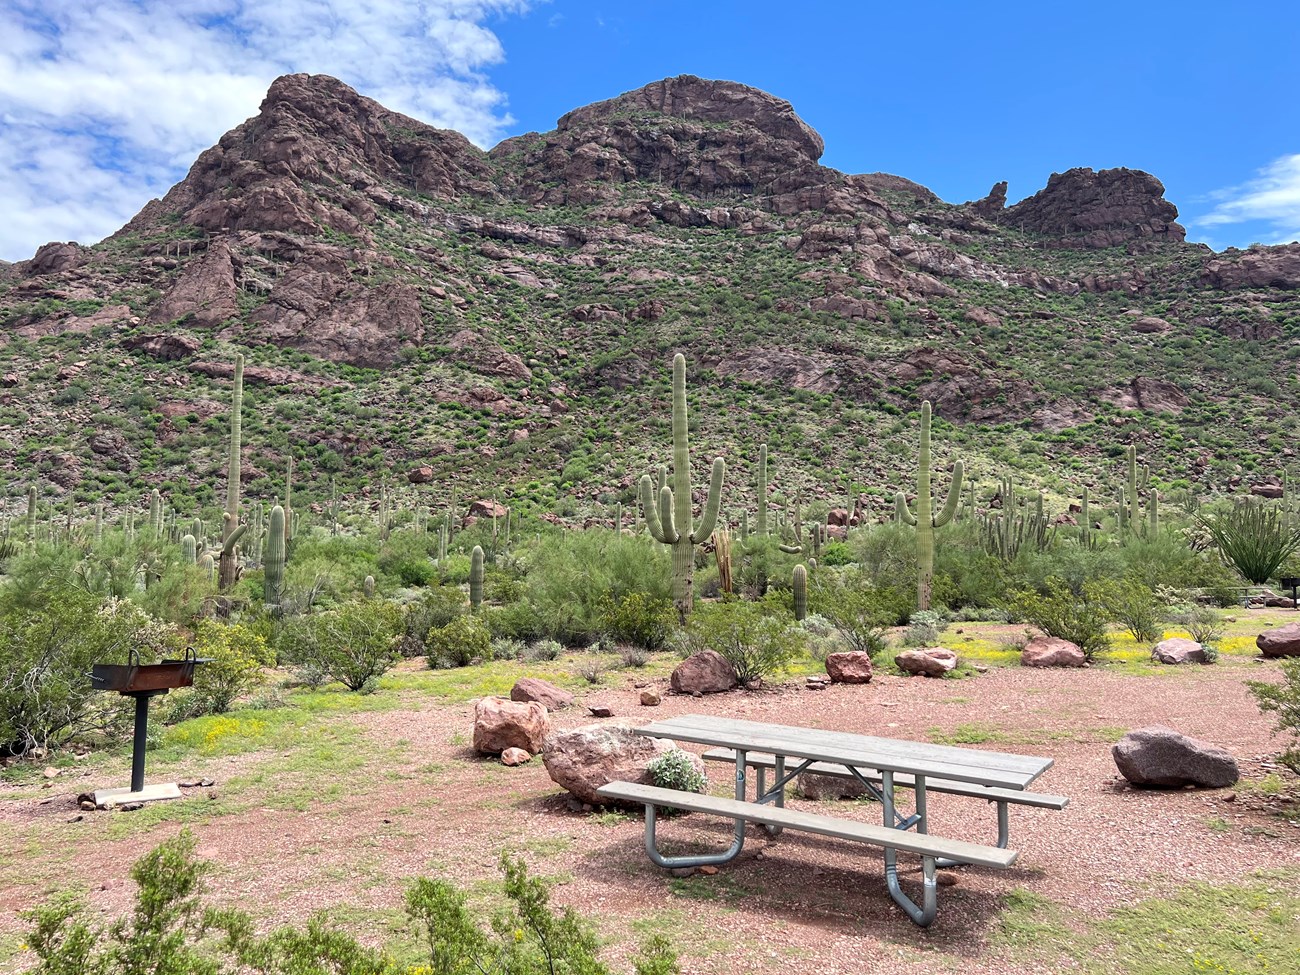 The picnic table at Alamo Campground site two sits in front of a beautiful mountain